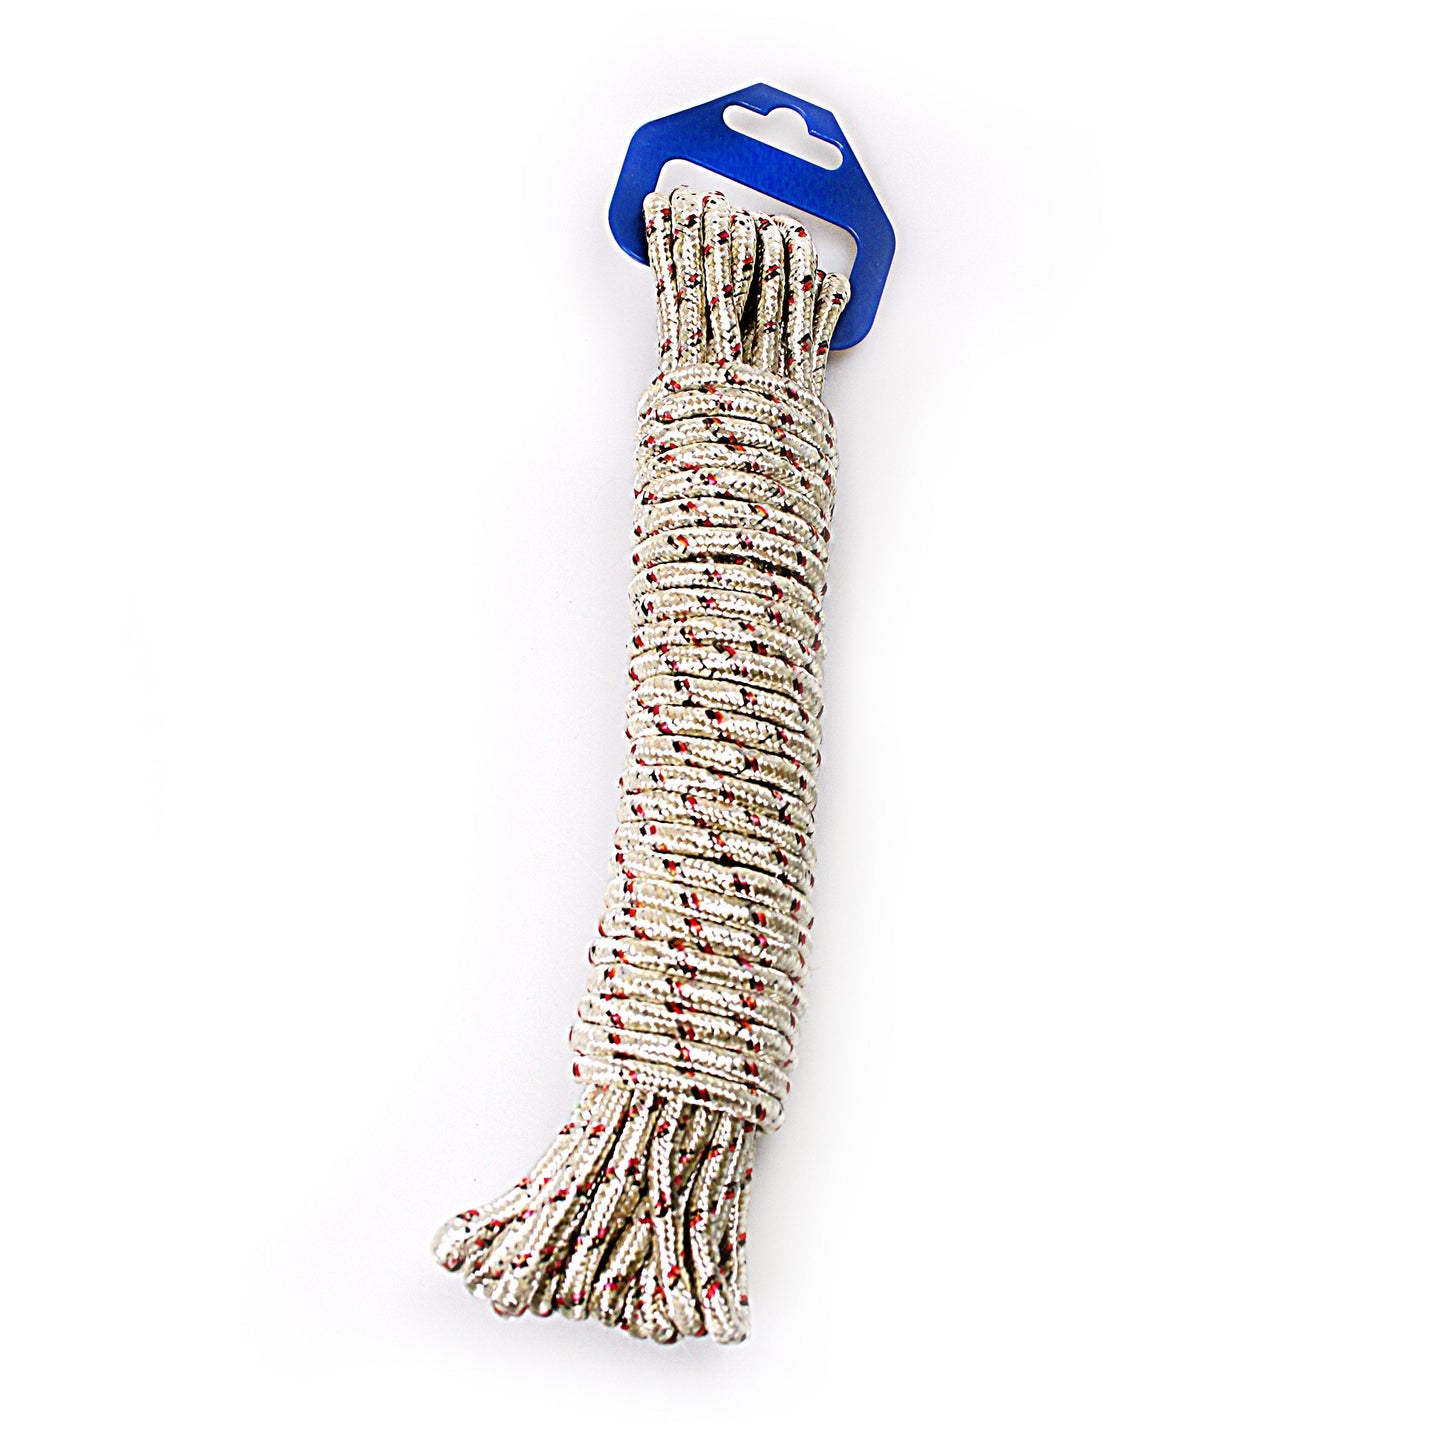 Utility Rope Multi Purpose Braid Heavy Duty Strong Cord 0256 (Parcel Rate)